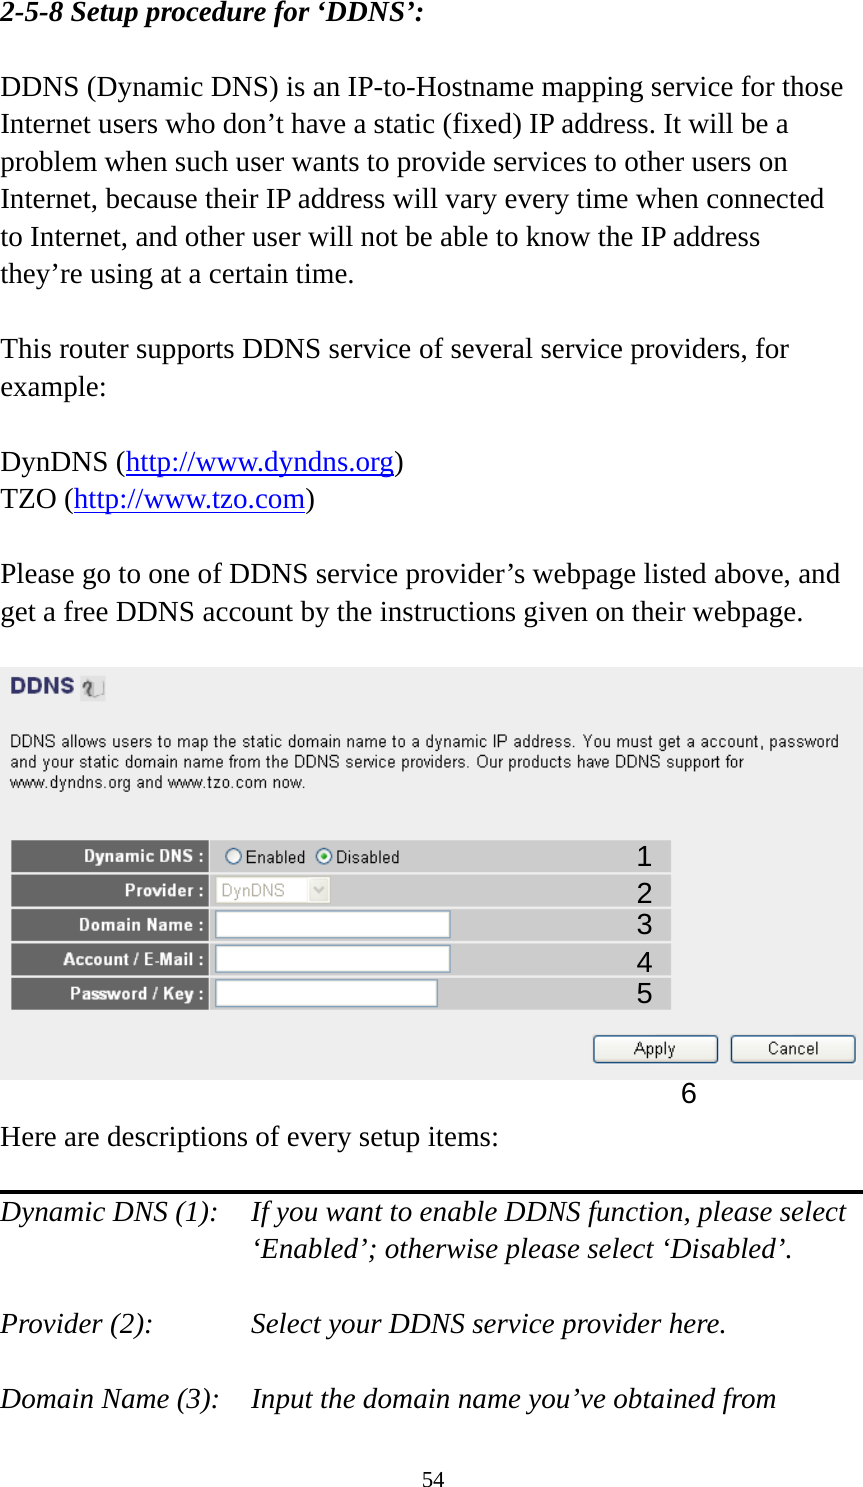 54 2-5-8 Setup procedure for ‘DDNS’:  DDNS (Dynamic DNS) is an IP-to-Hostname mapping service for those Internet users who don’t have a static (fixed) IP address. It will be a problem when such user wants to provide services to other users on Internet, because their IP address will vary every time when connected to Internet, and other user will not be able to know the IP address they’re using at a certain time.  This router supports DDNS service of several service providers, for example:  DynDNS (http://www.dyndns.org) TZO (http://www.tzo.com)  Please go to one of DDNS service provider’s webpage listed above, and get a free DDNS account by the instructions given on their webpage.    Here are descriptions of every setup items:  Dynamic DNS (1):    If you want to enable DDNS function, please select ‘Enabled’; otherwise please select ‘Disabled’.  Provider (2):      Select your DDNS service provider here.  Domain Name (3):    Input the domain name you’ve obtained from 1 2345 6 